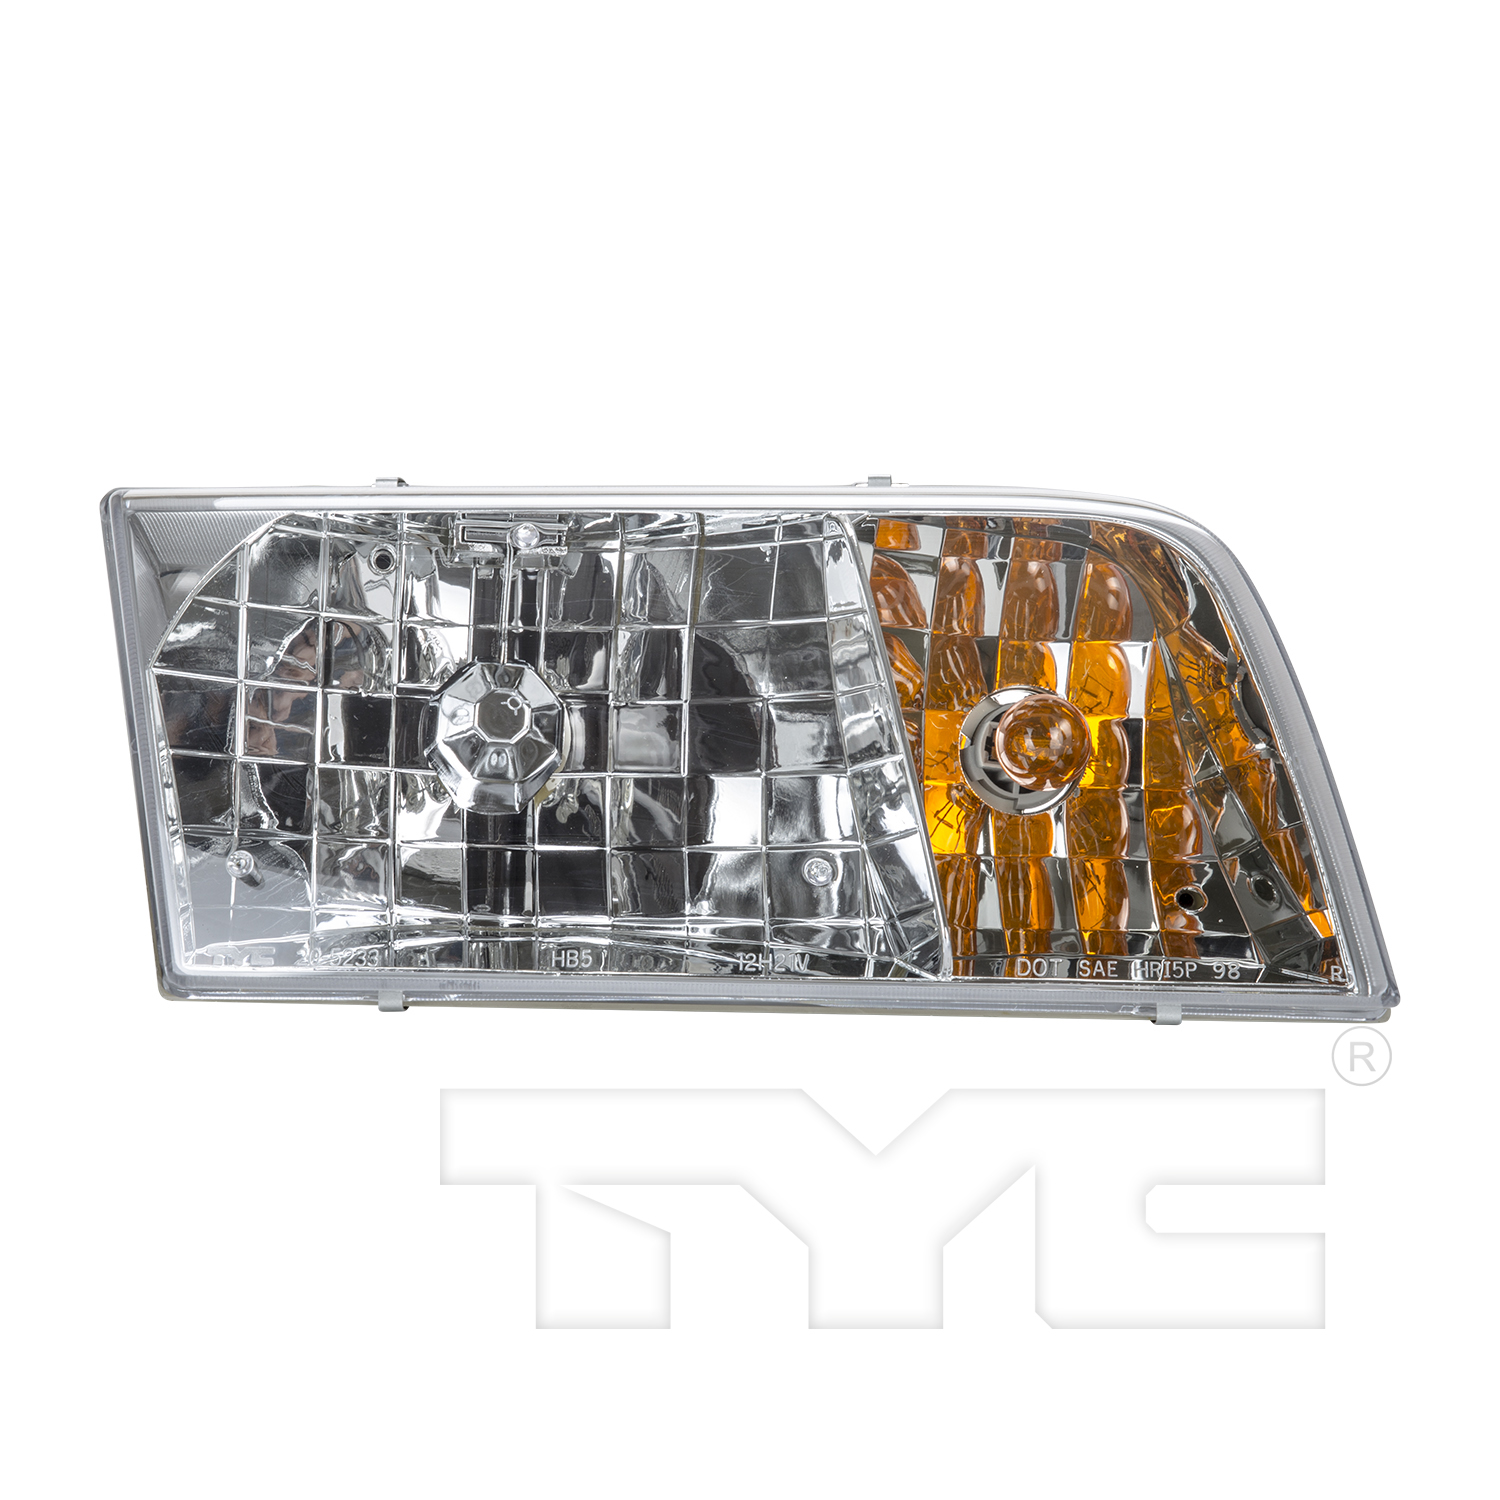 Aftermarket HEADLIGHTS for FORD - CROWN VICTORIA, CROWN VICTORIA,98-02,RT Headlamp assy composite